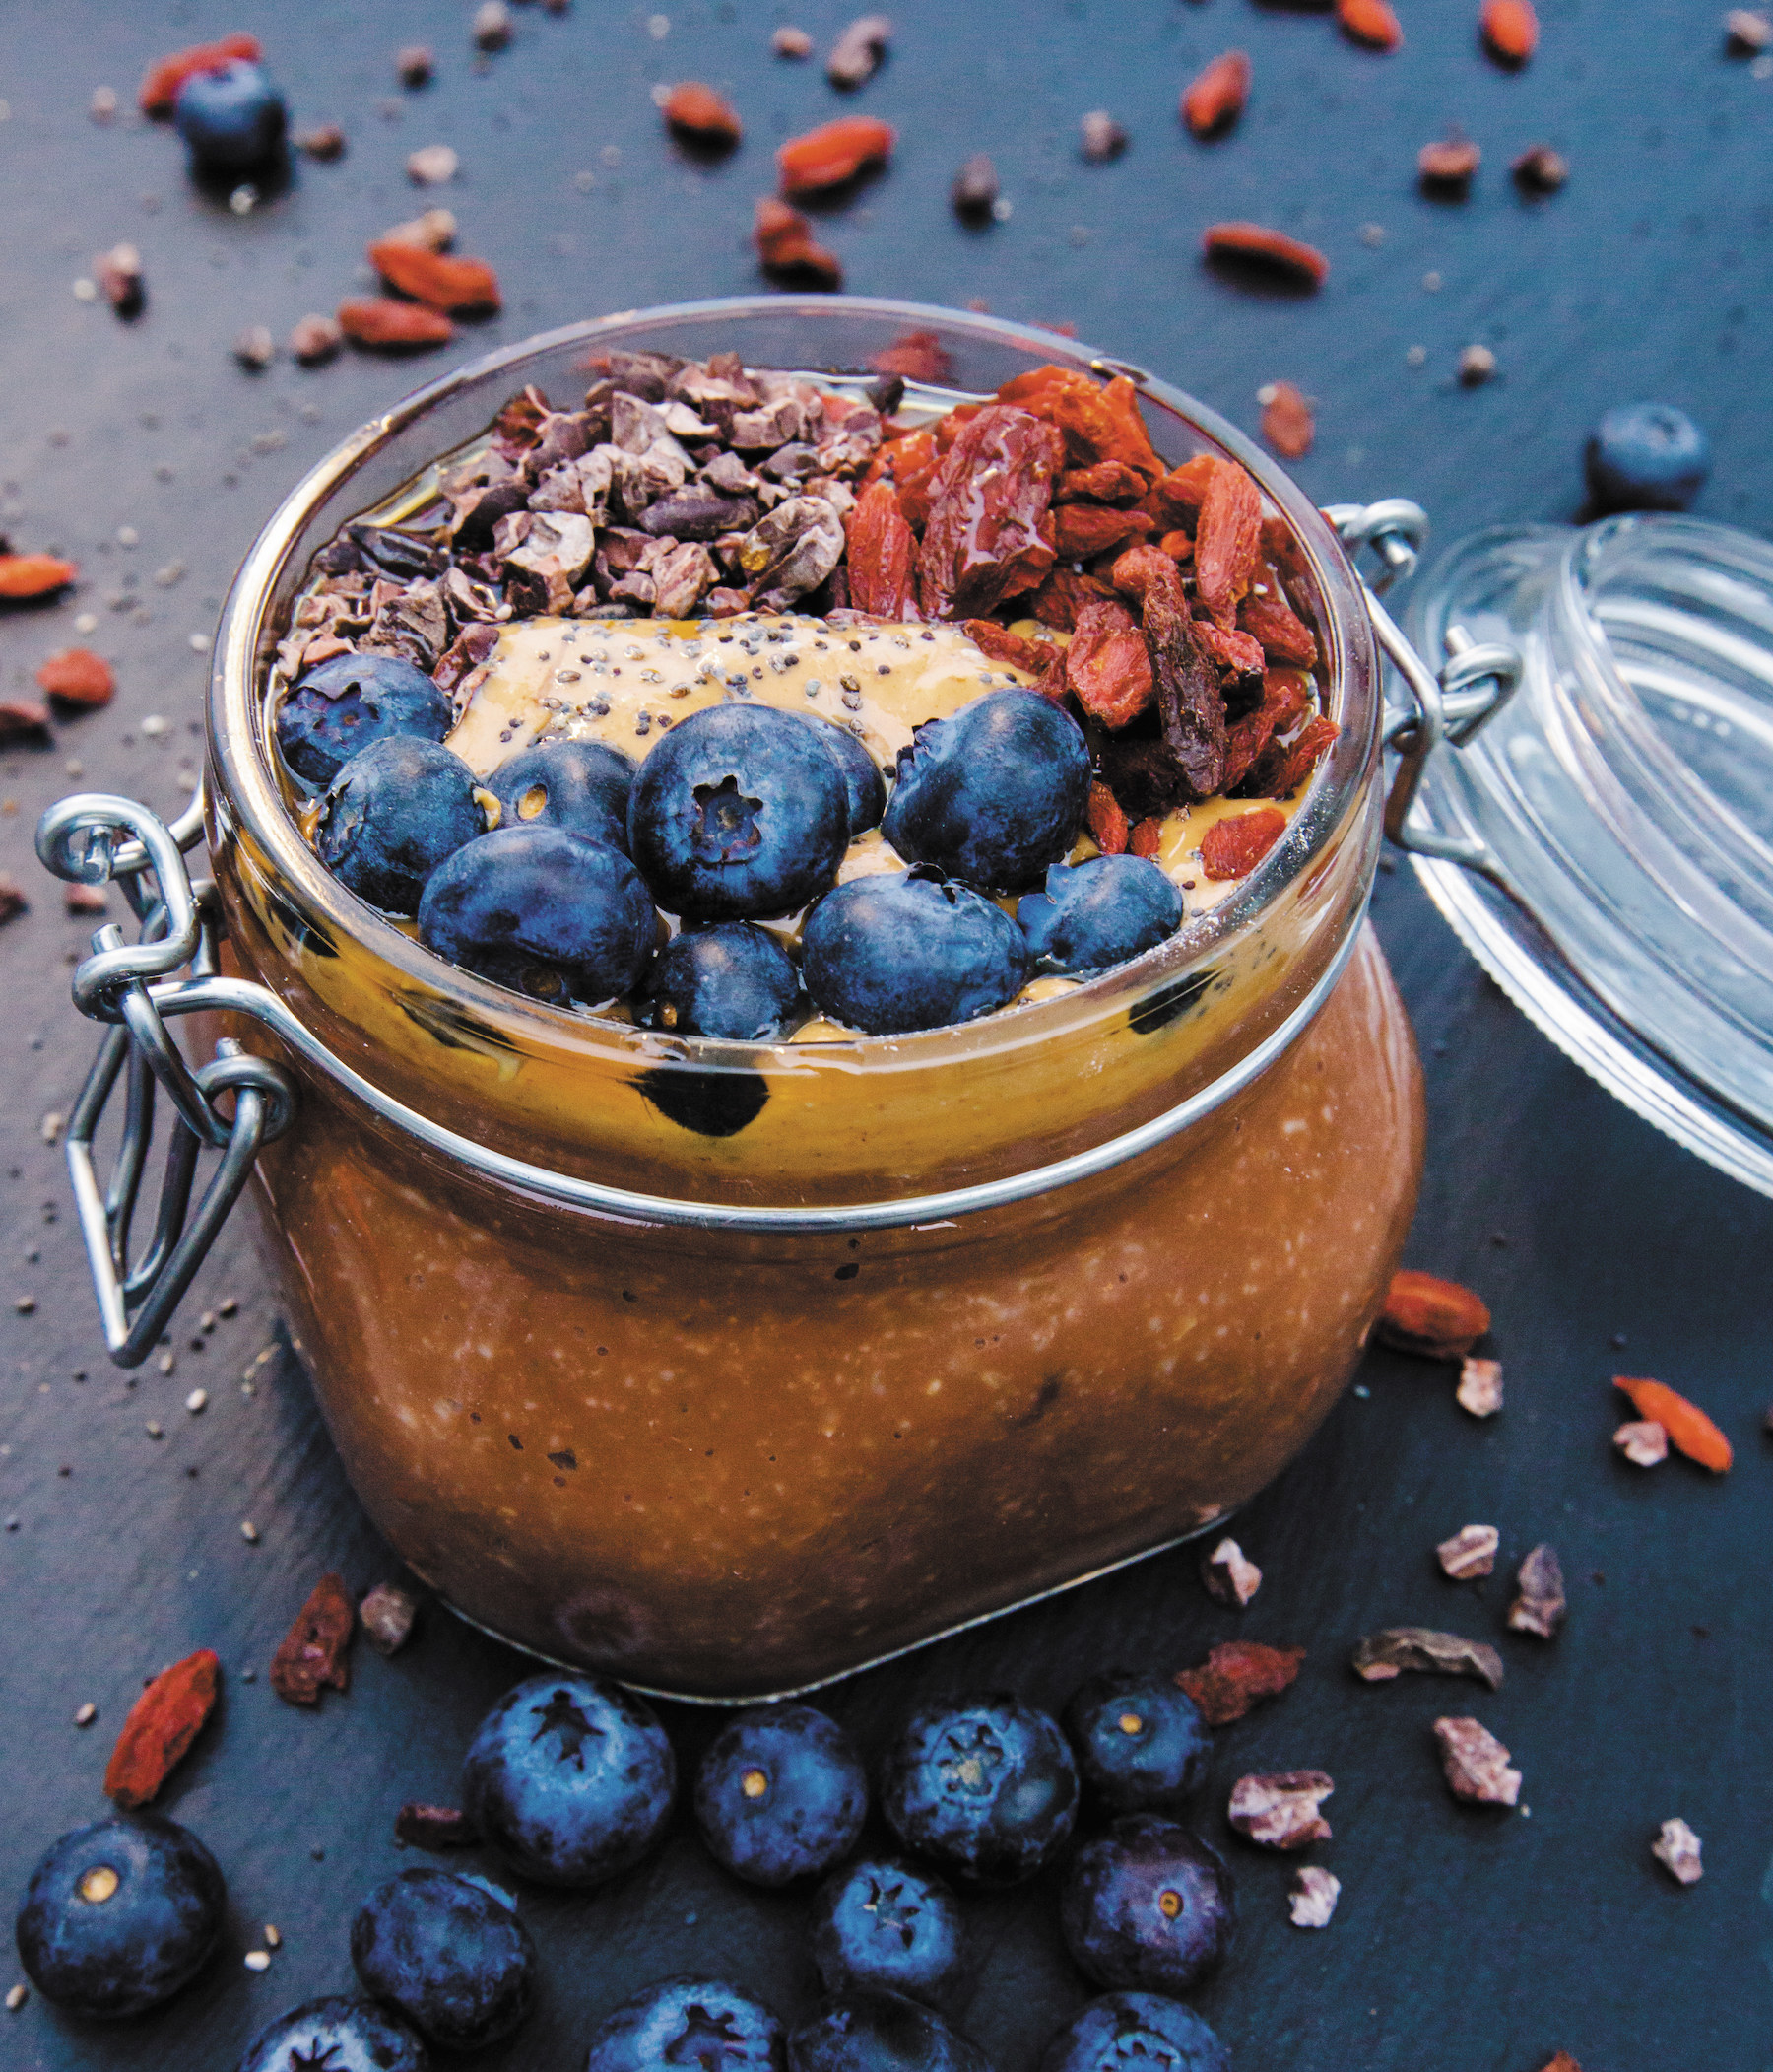 Chocolate overnight oats with blueberries, goji berries, chia seeds, and cacao nibs.